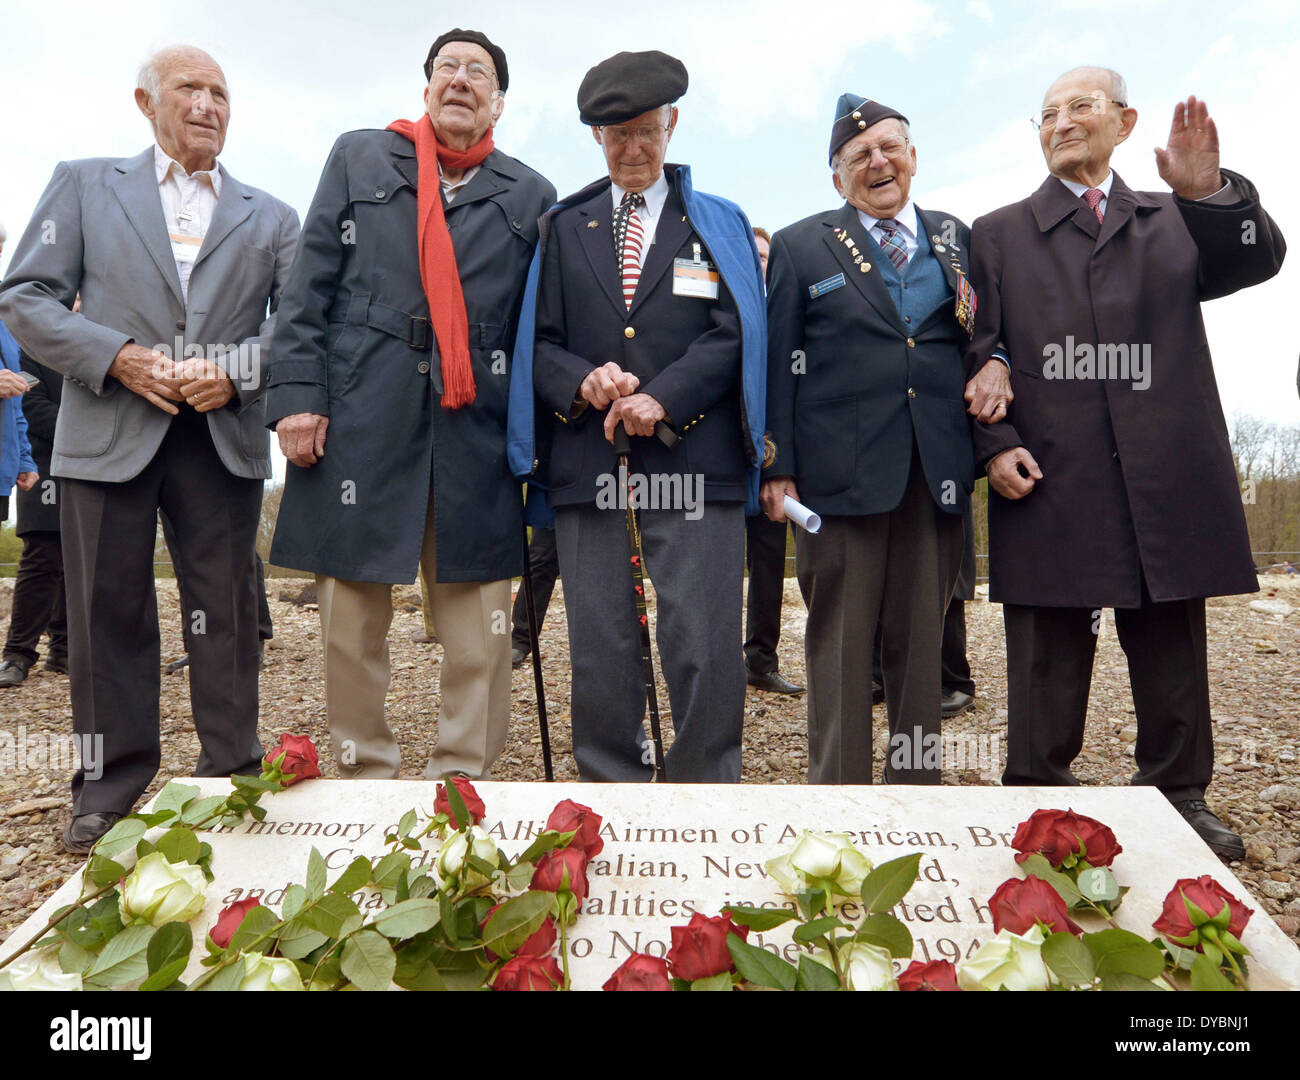 Weimar, Germany. 13th Apr, 2014. The former deported members of the allied air force Chasten Bowen (L-R), Richard Bedford, Donald Shearer and Ed Carter-Edwards and the president of the international committee Buchenwald-Dora and command Bertrand Herz, stand in front of a plaque during the 69th anniversary of the liberation of the concentration camp Buchenwald, near Weimar, Germany, 13 April 2014. Photo: Jens-Ulrich Koch/dpa/Alamy Live News Stock Photo